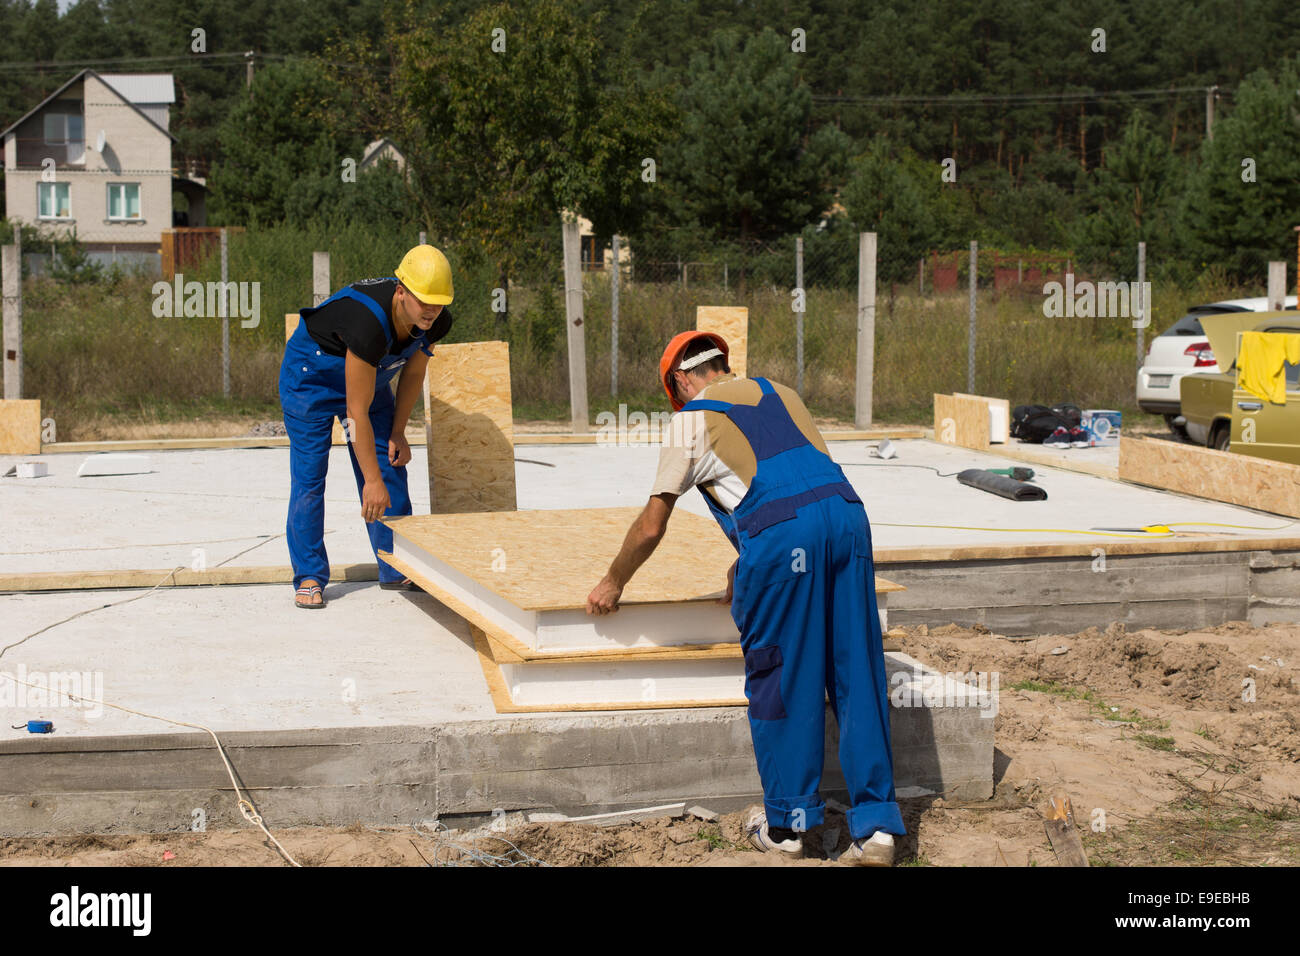 Two builders or construction workers handling insulated wall panels as they get ready to install them on the floor and foundation of a new build house. Stock Photo